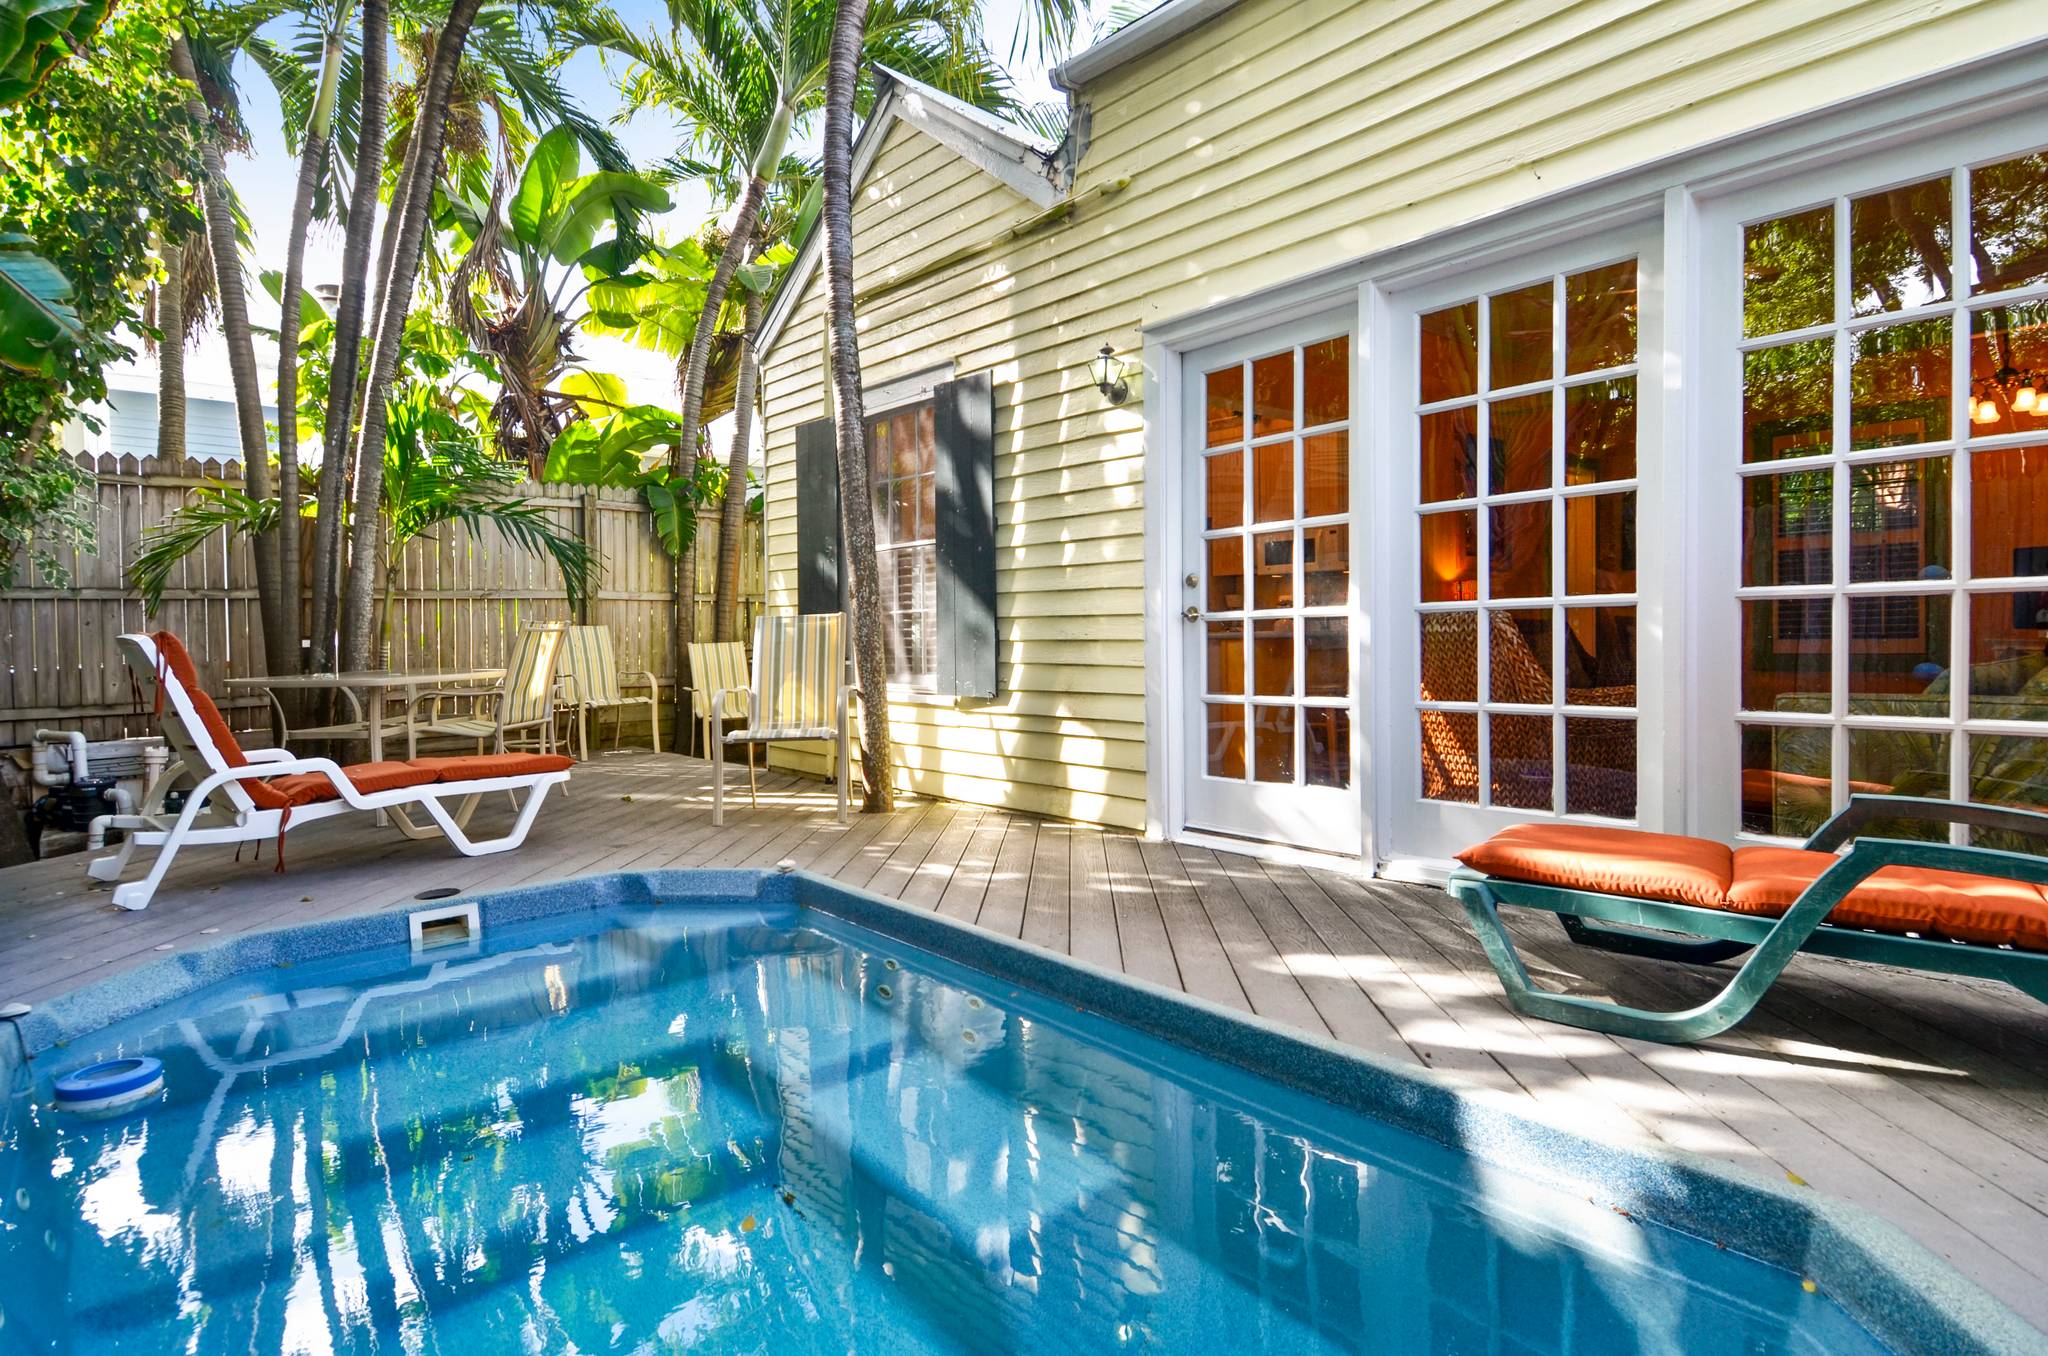 Your Key West escape with a backyard pool oasis.